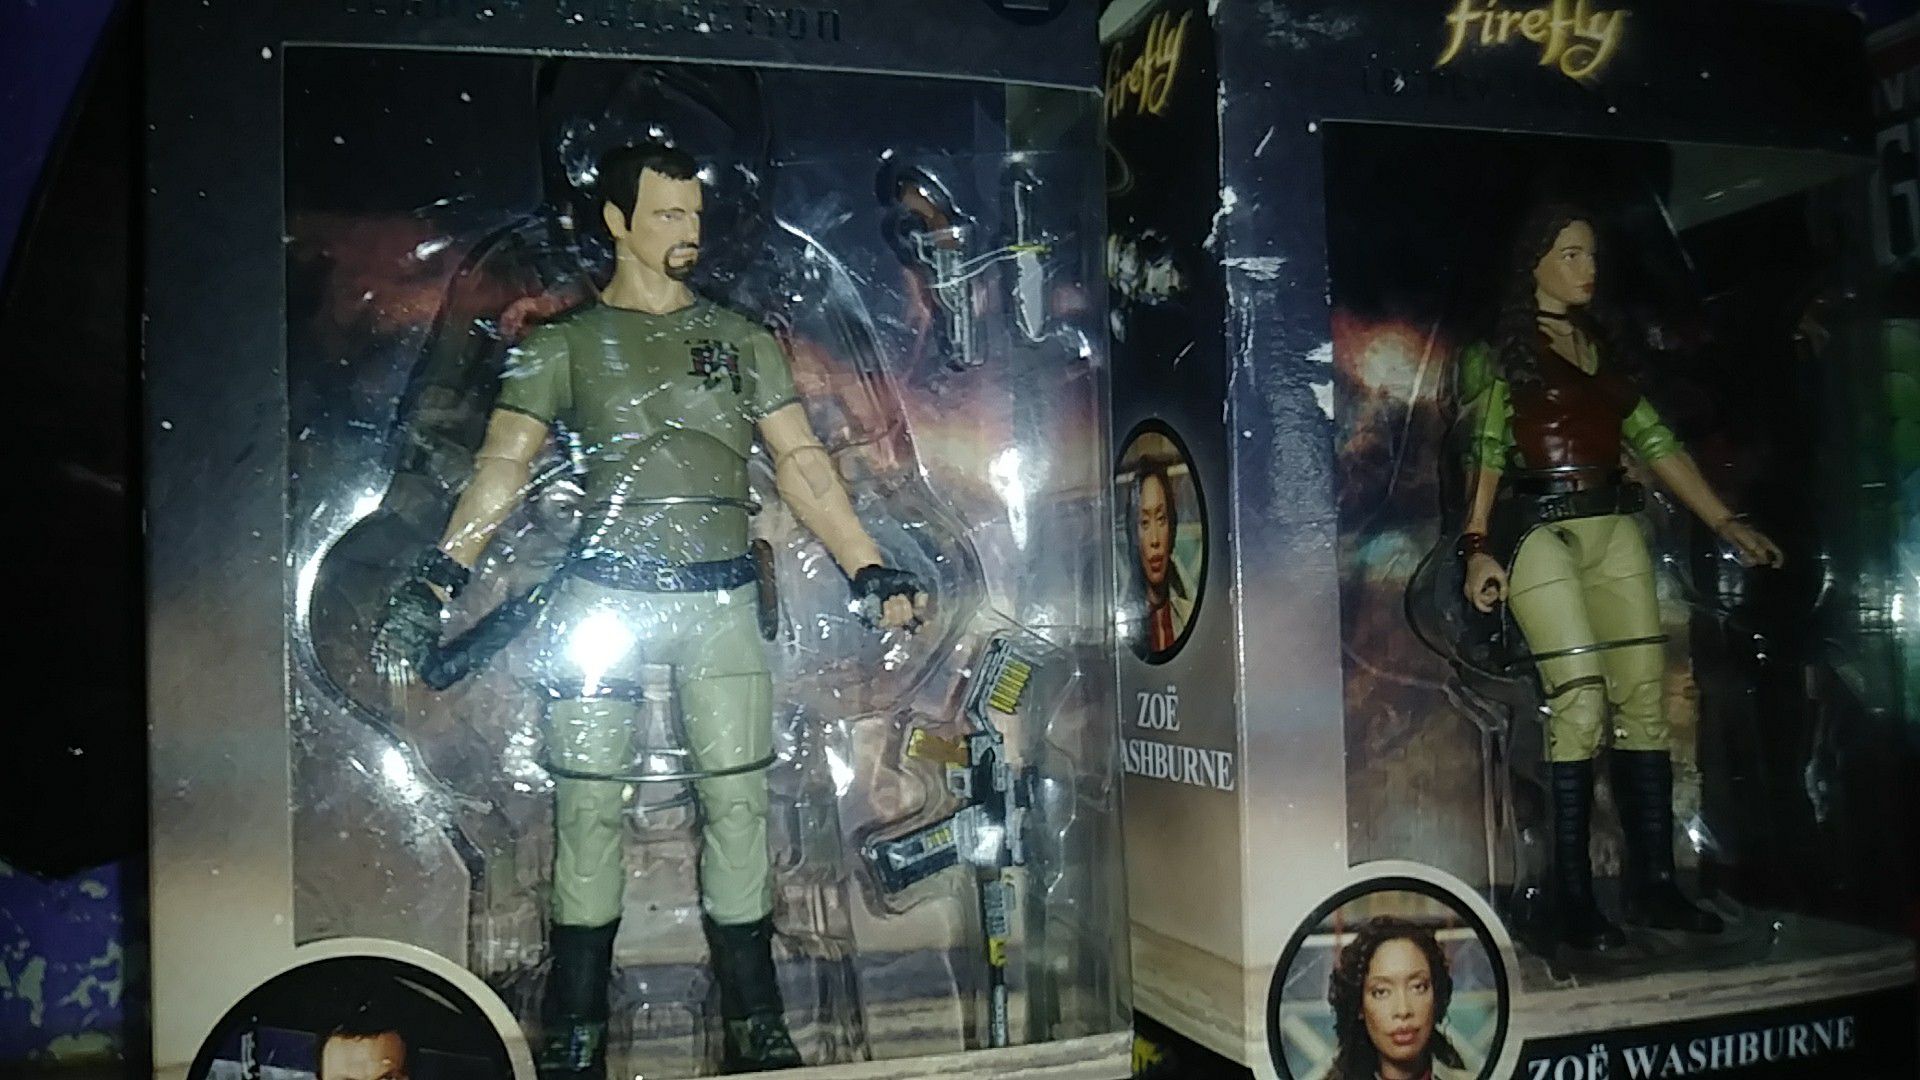 Firefly action fig